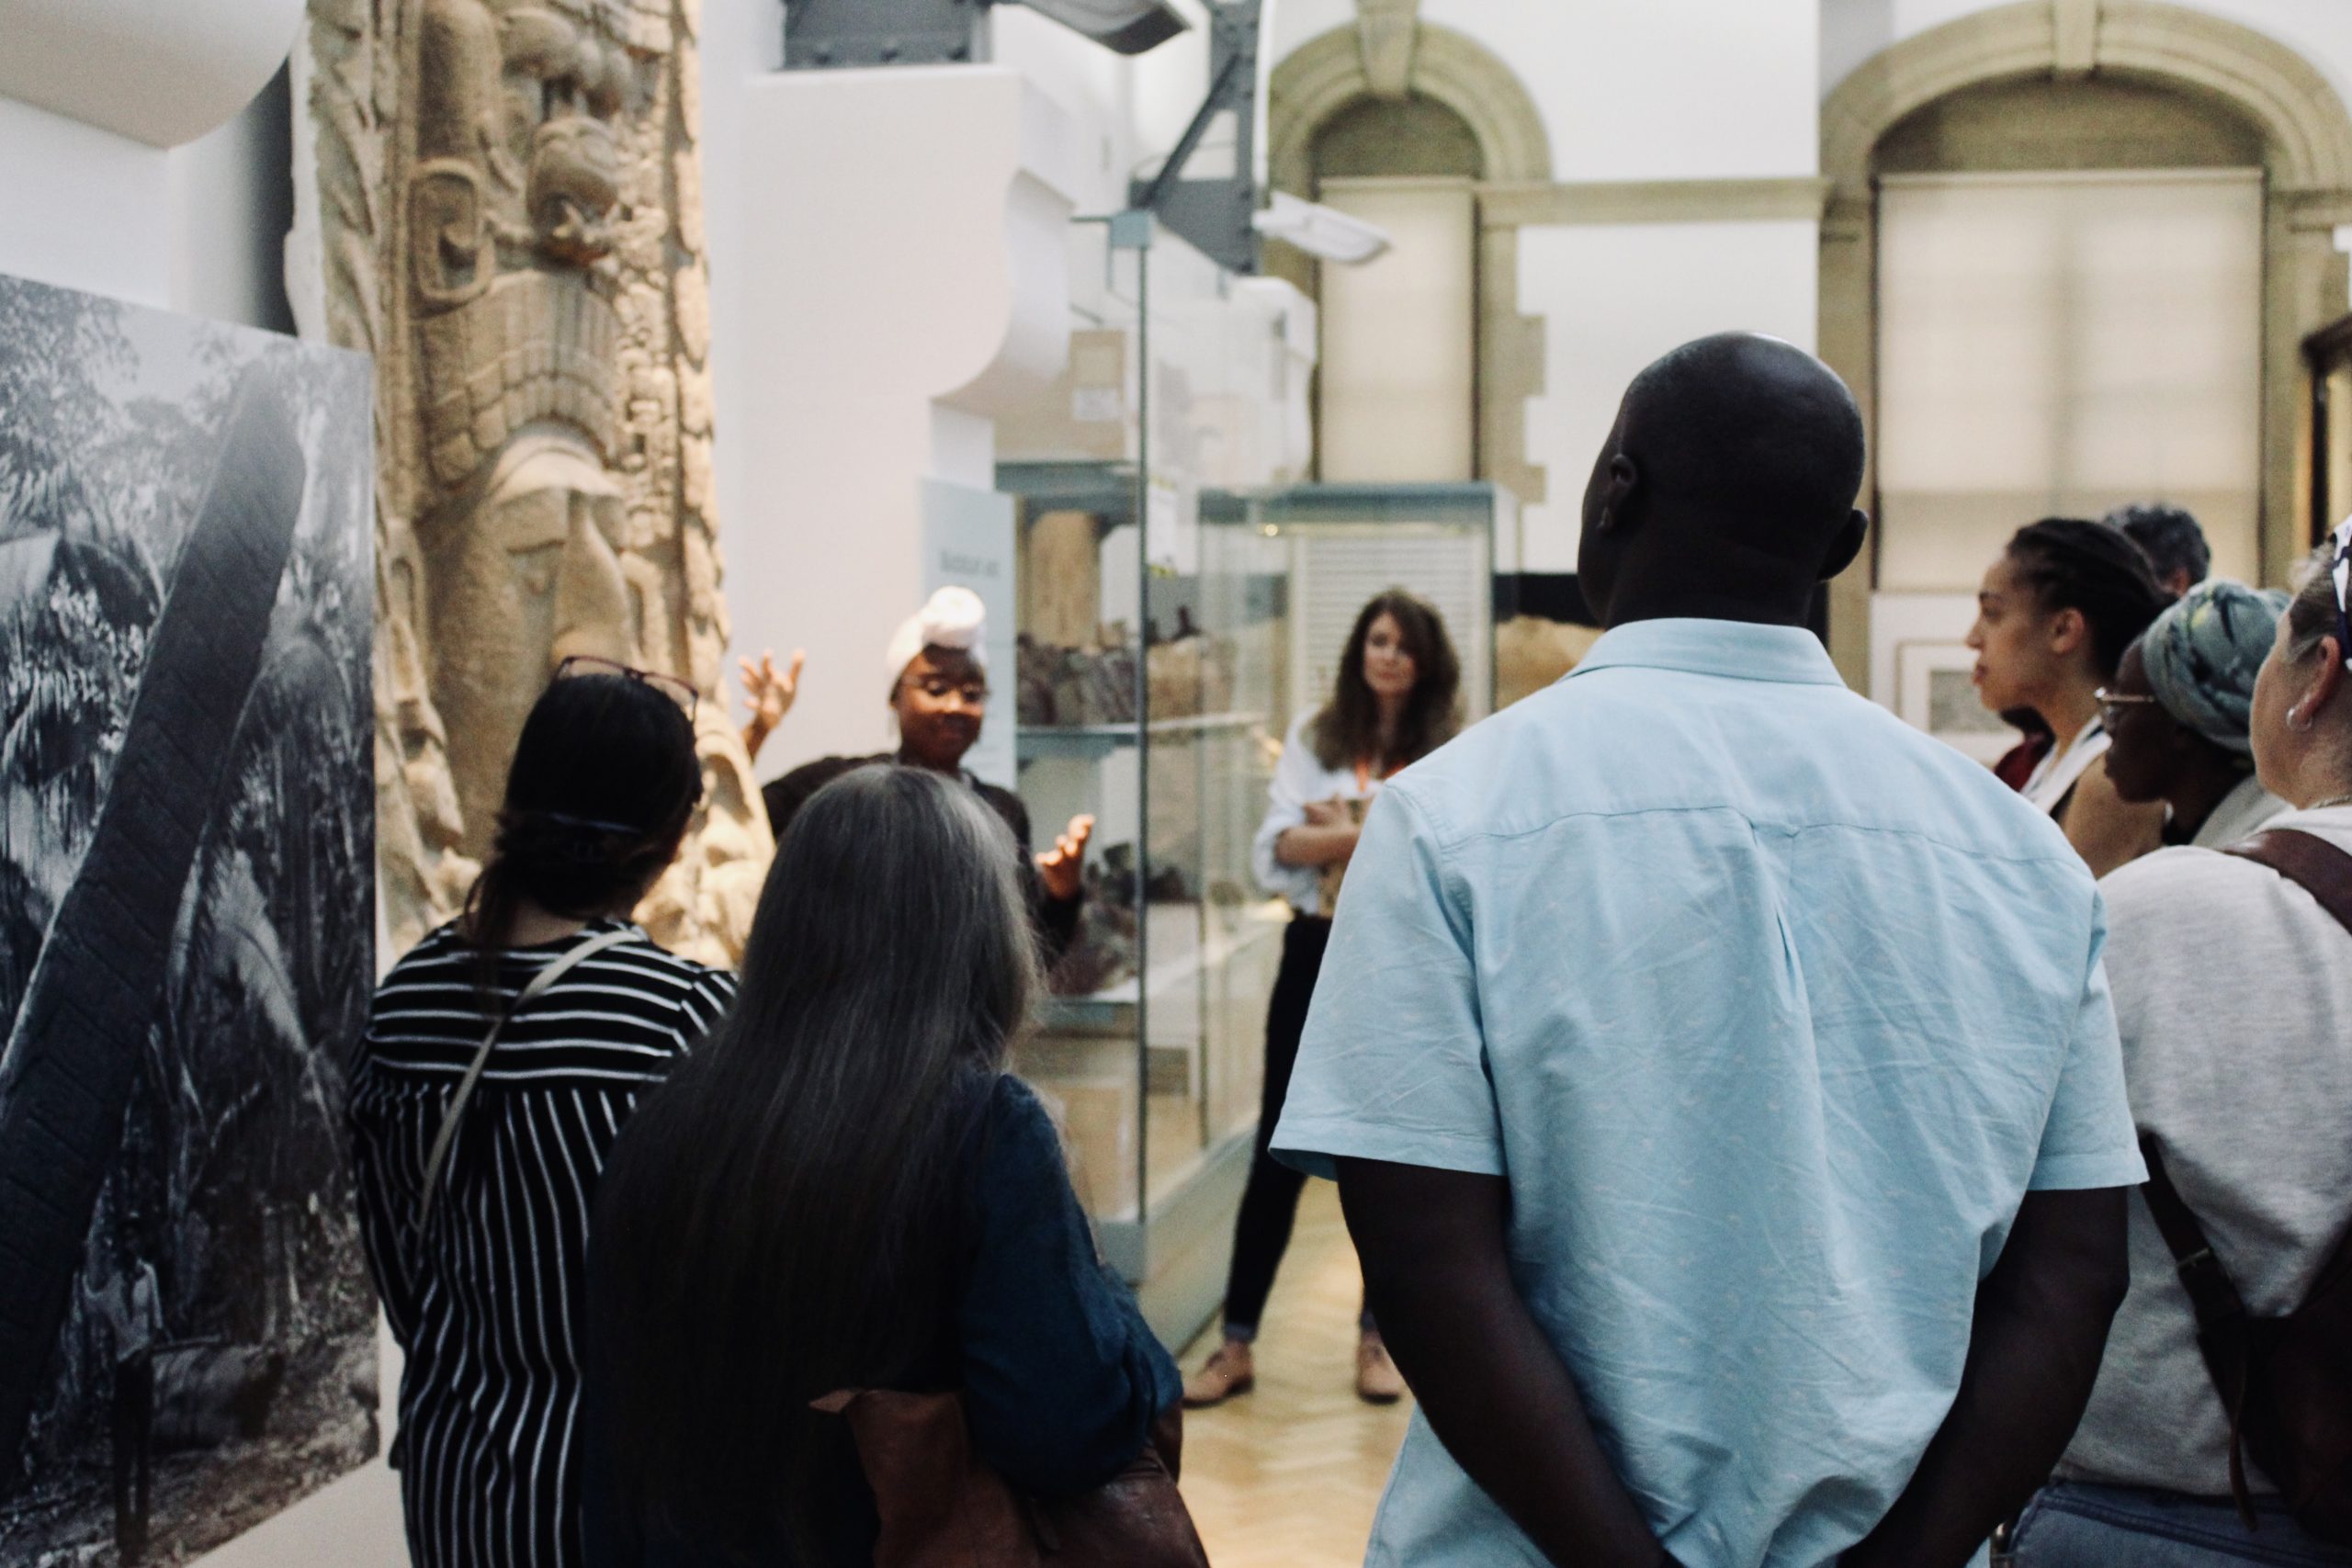 participants cluster around a relief in the Museum of Archaeology and Anthropology